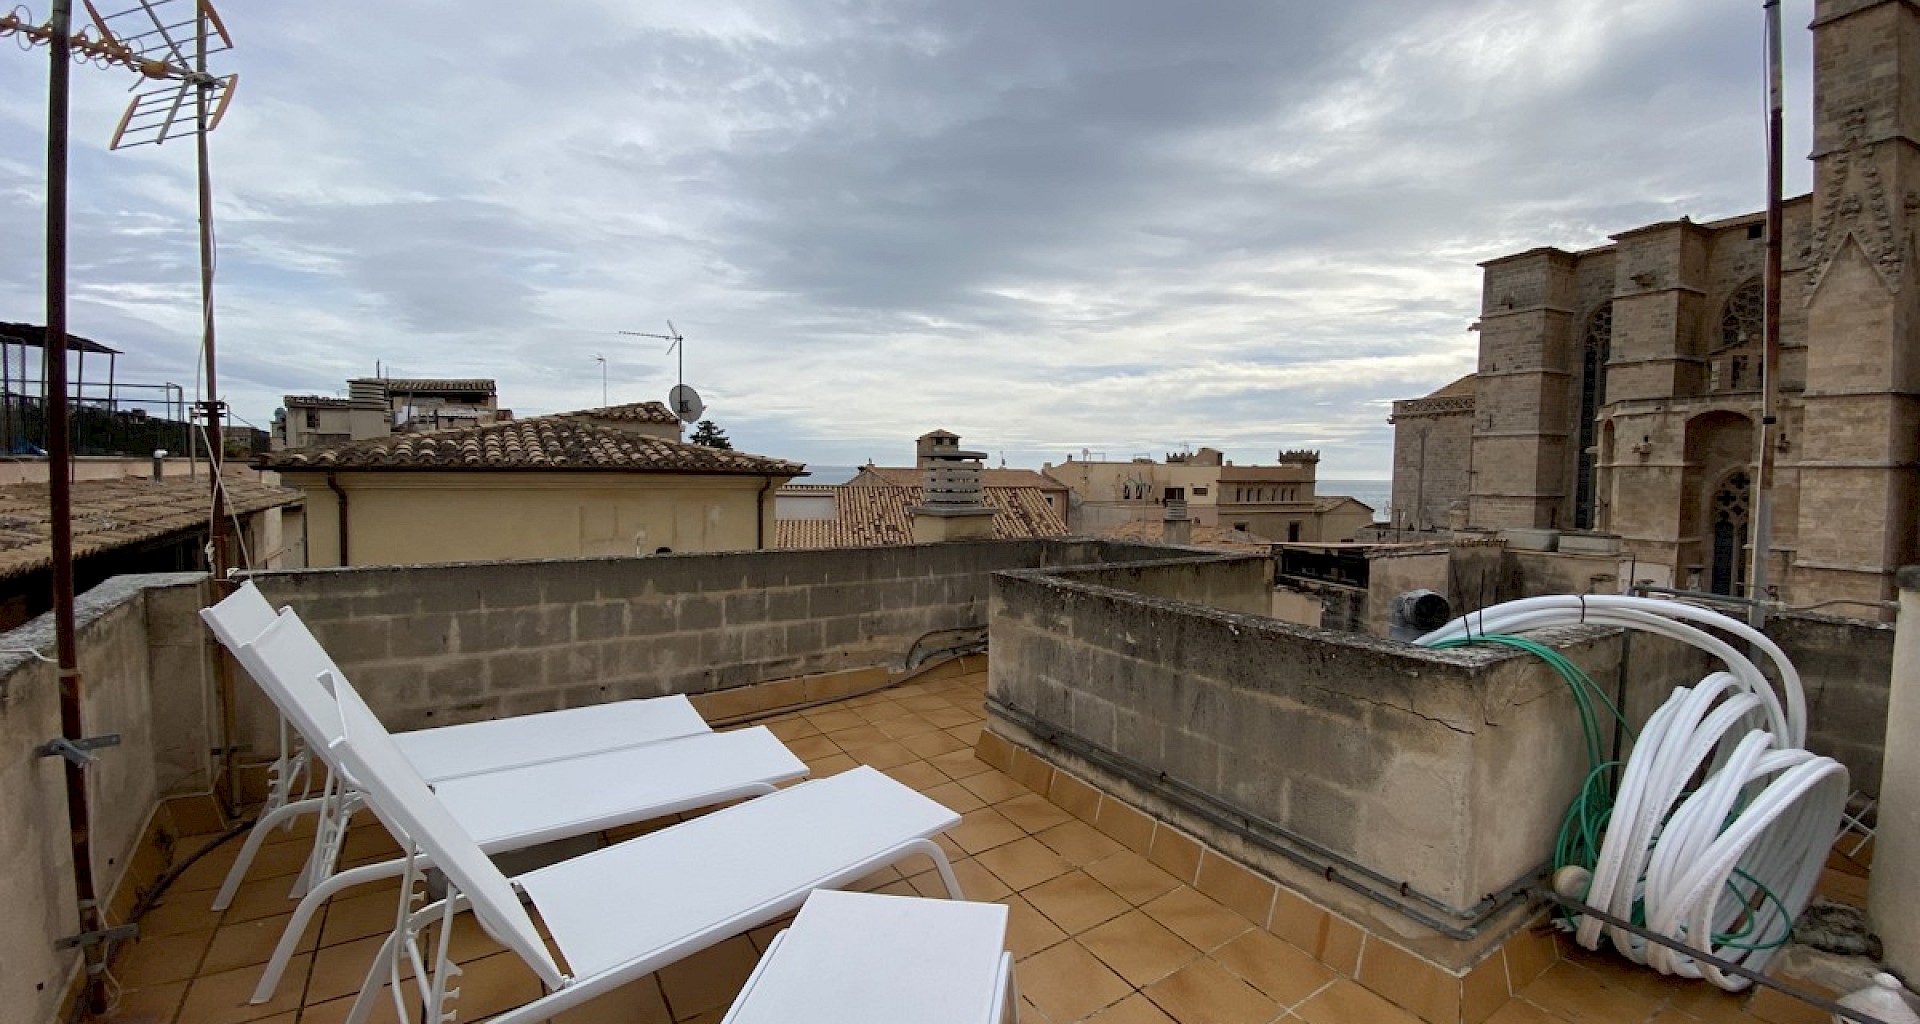 KROHN & LUEDEMANN Modern renovated apartment in Palma old town for sale Wohnung in Palma Altstadt 17